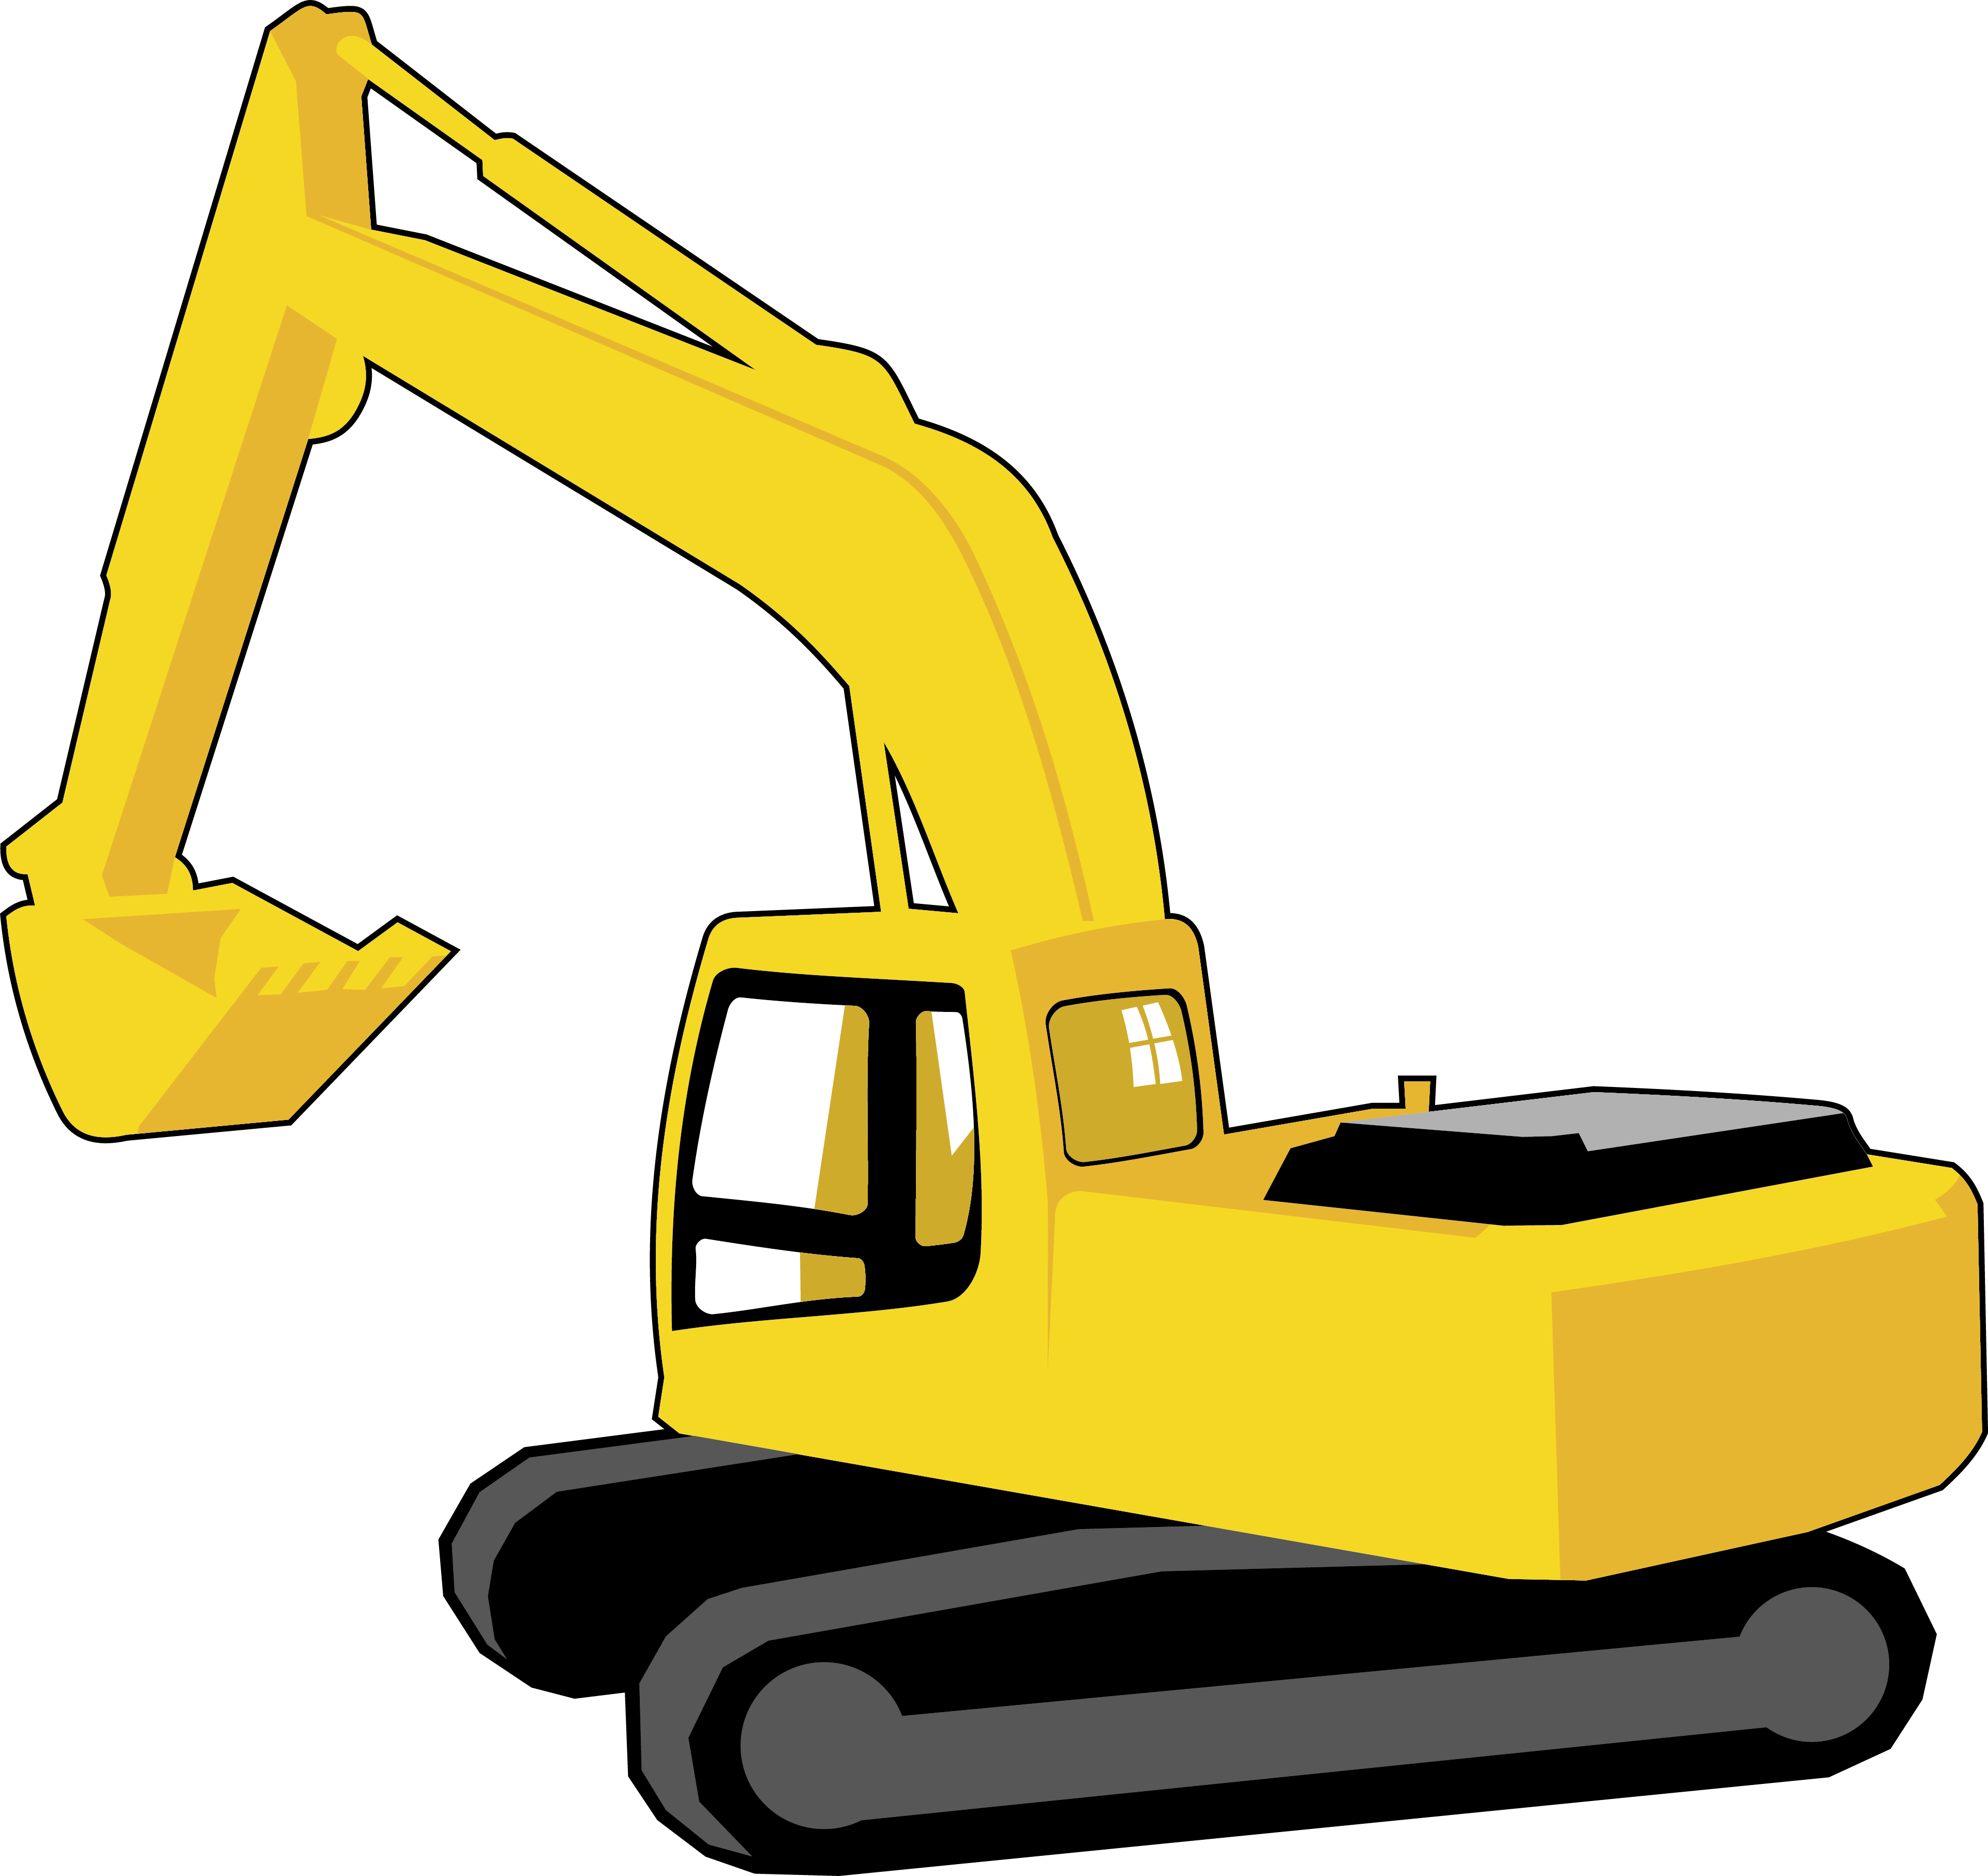 Clipart Free Library Excavator At Getdrawings Com.